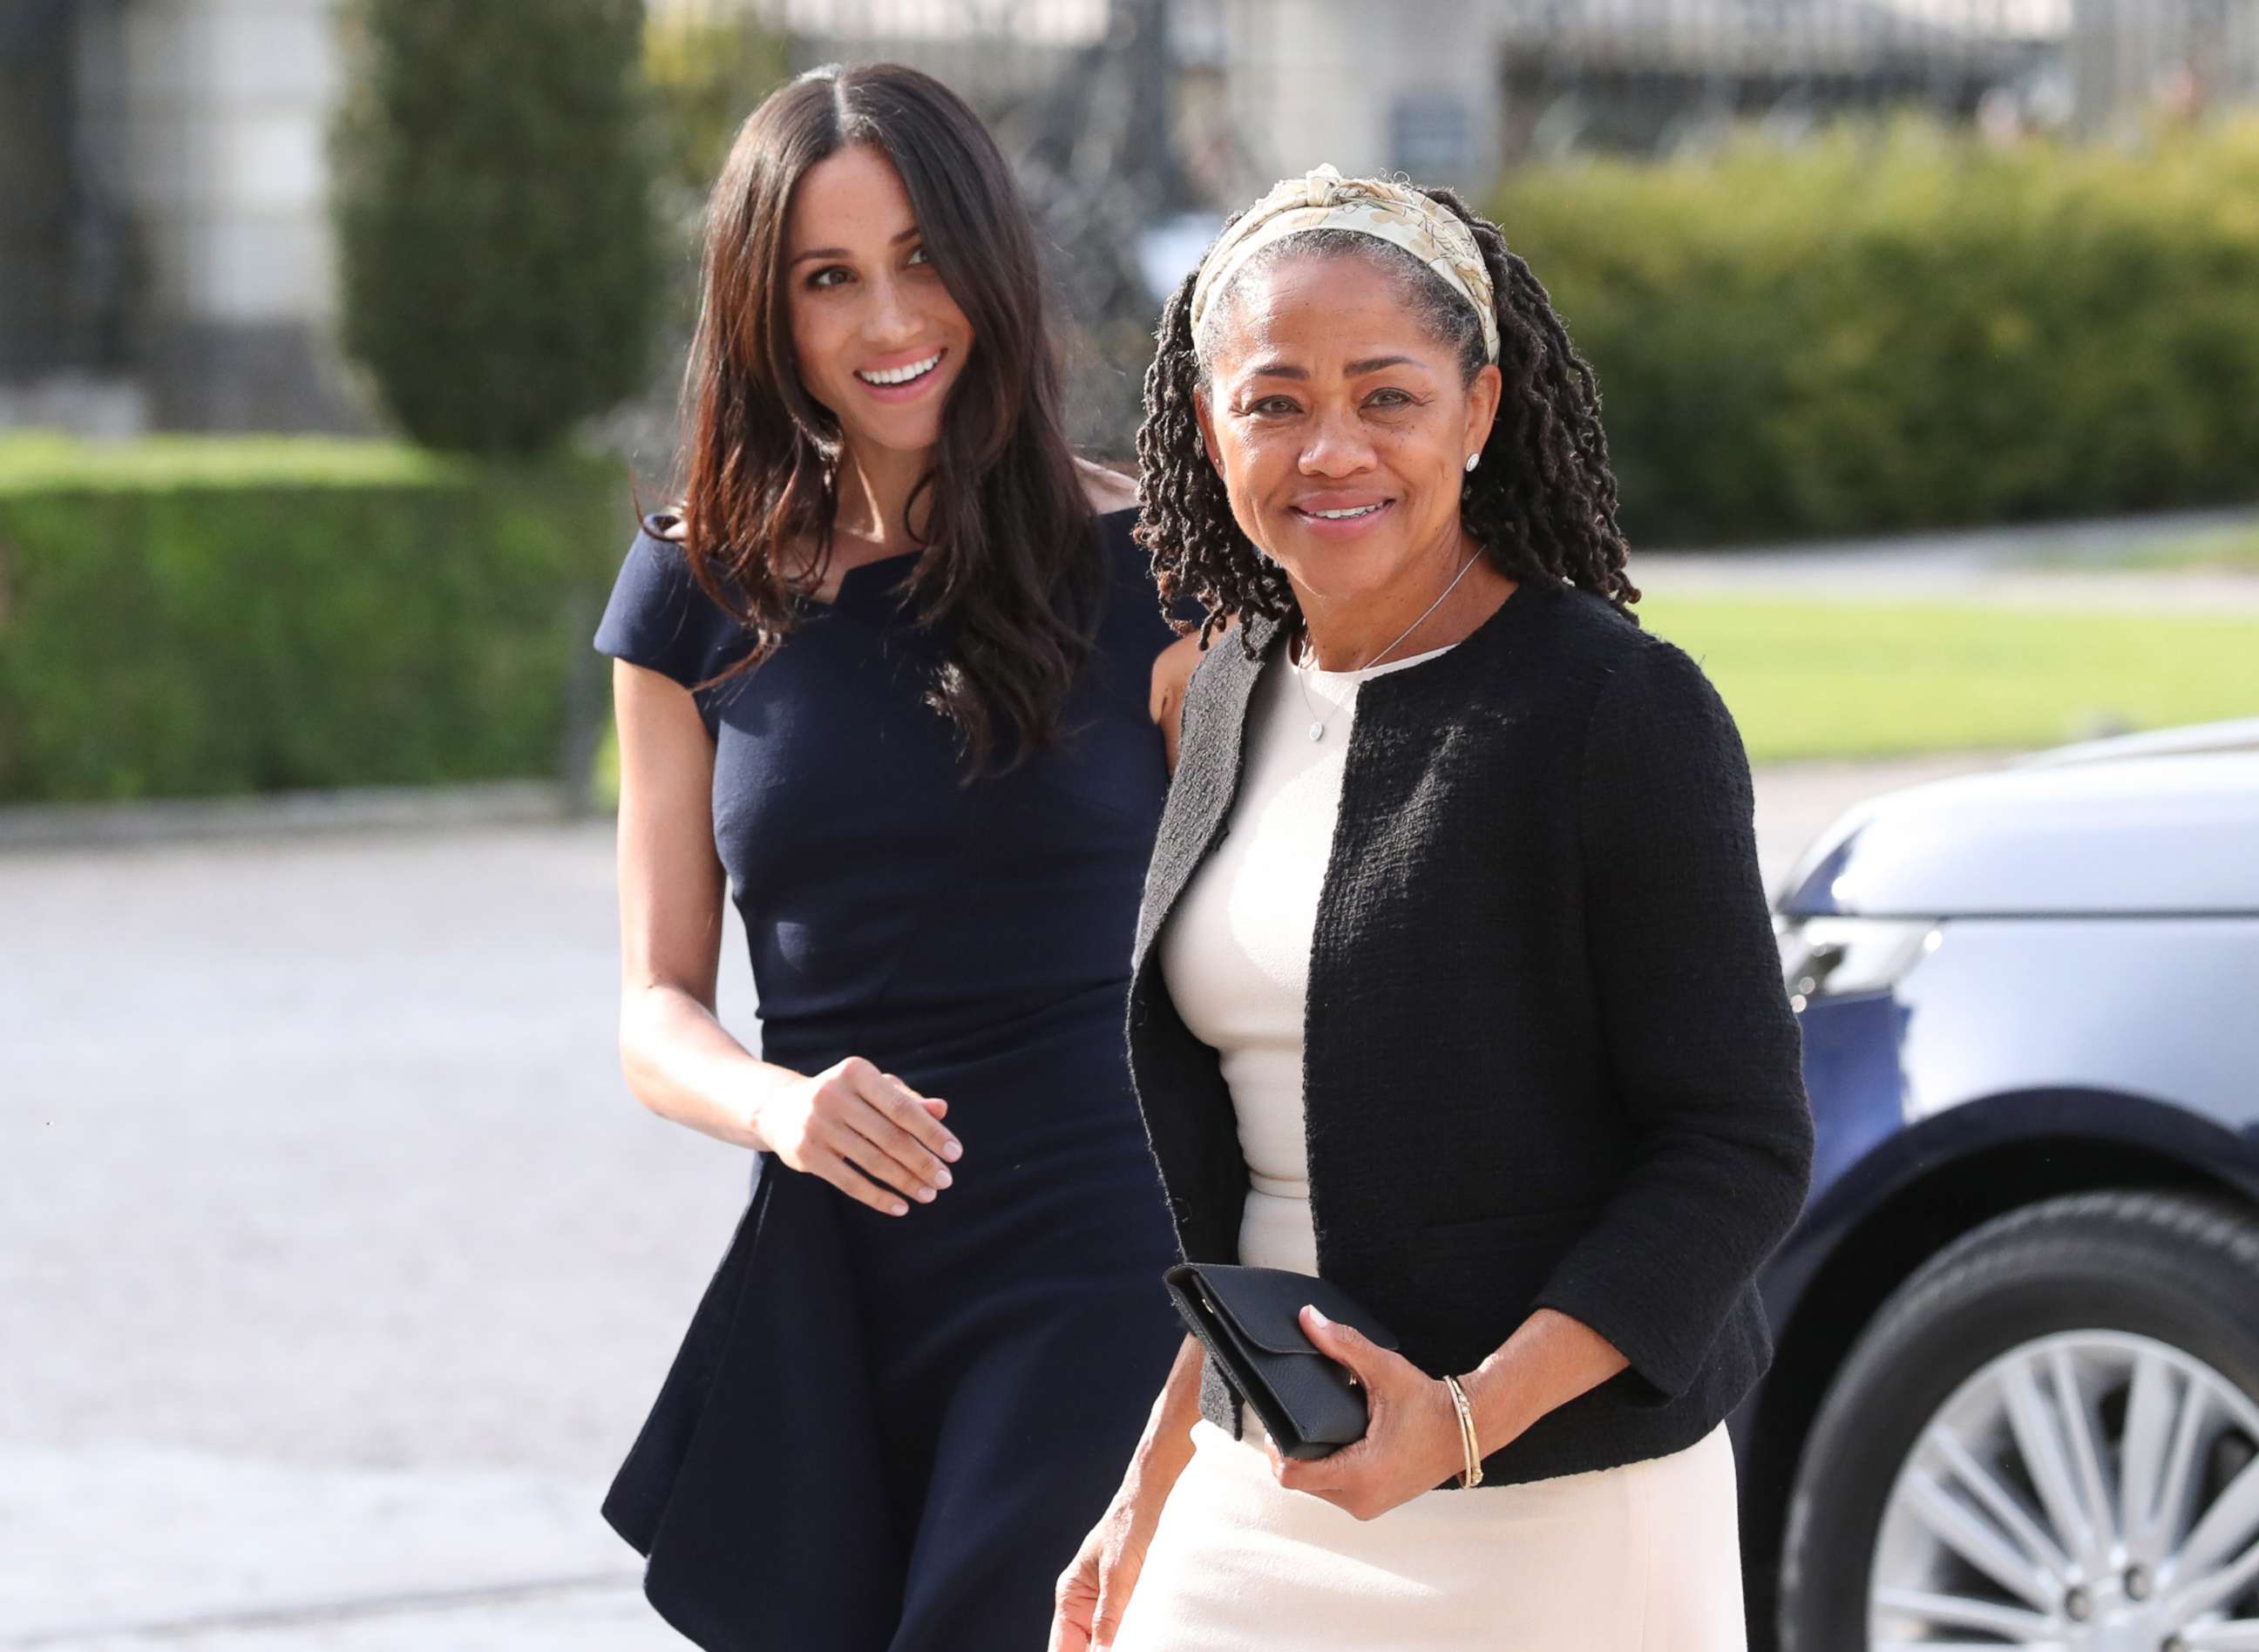 PHOTO: Meghan Markle and her mother, Doria Ragland arrive at Cliveden House Hotel on the National Trust's Cliveden Estate, May 18, 2018, in Berkshire, England.